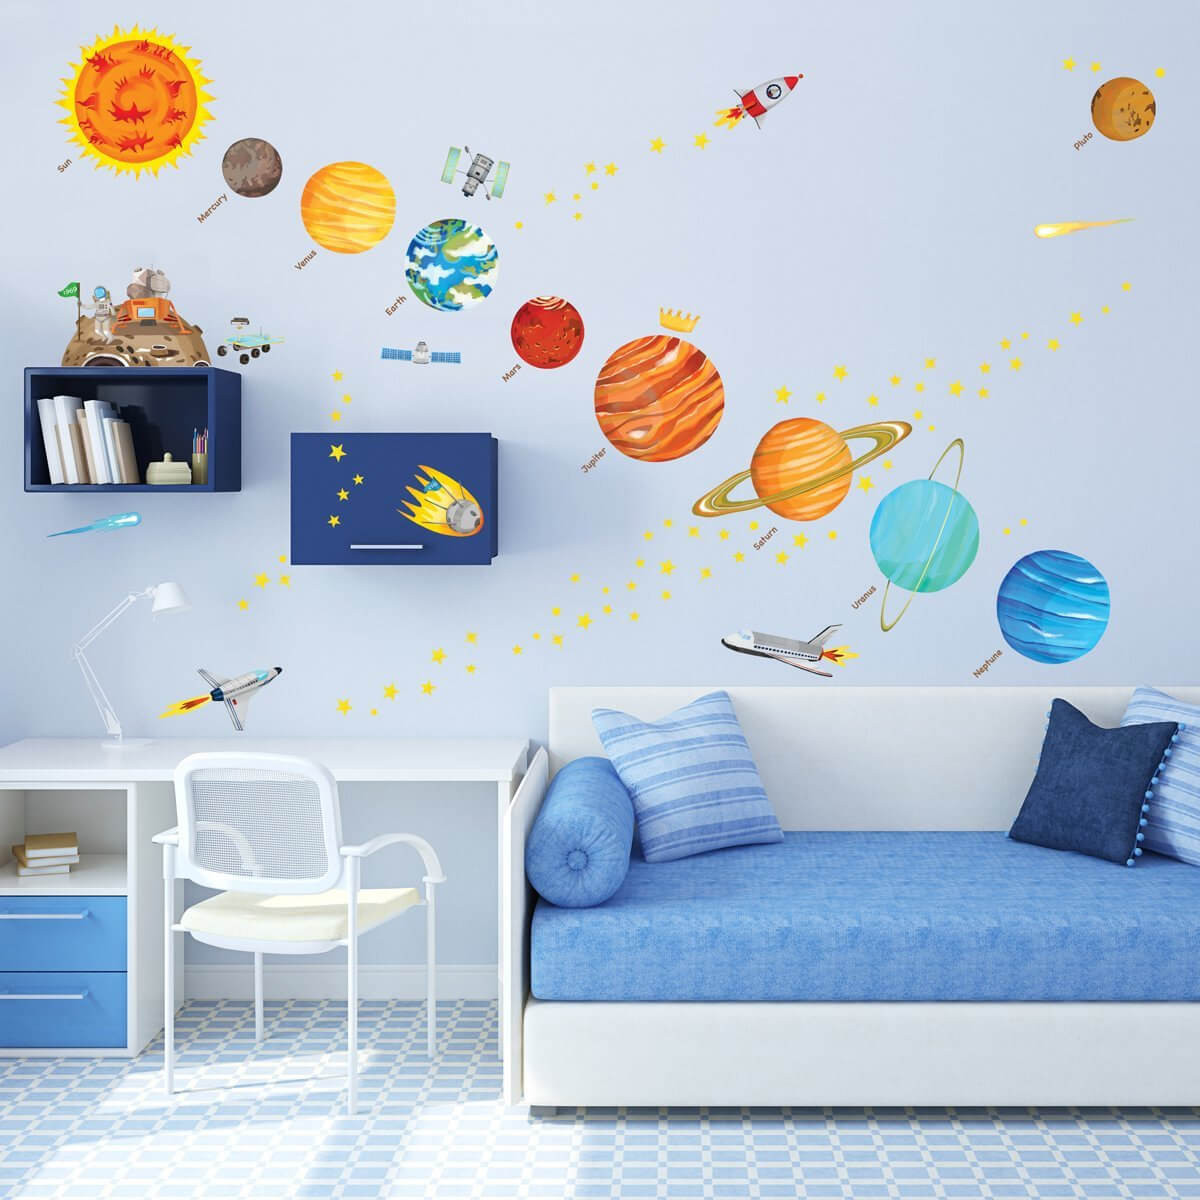 Wall Art Kids Rooms
 These Educational Wall Ideas are Perfect for Kids